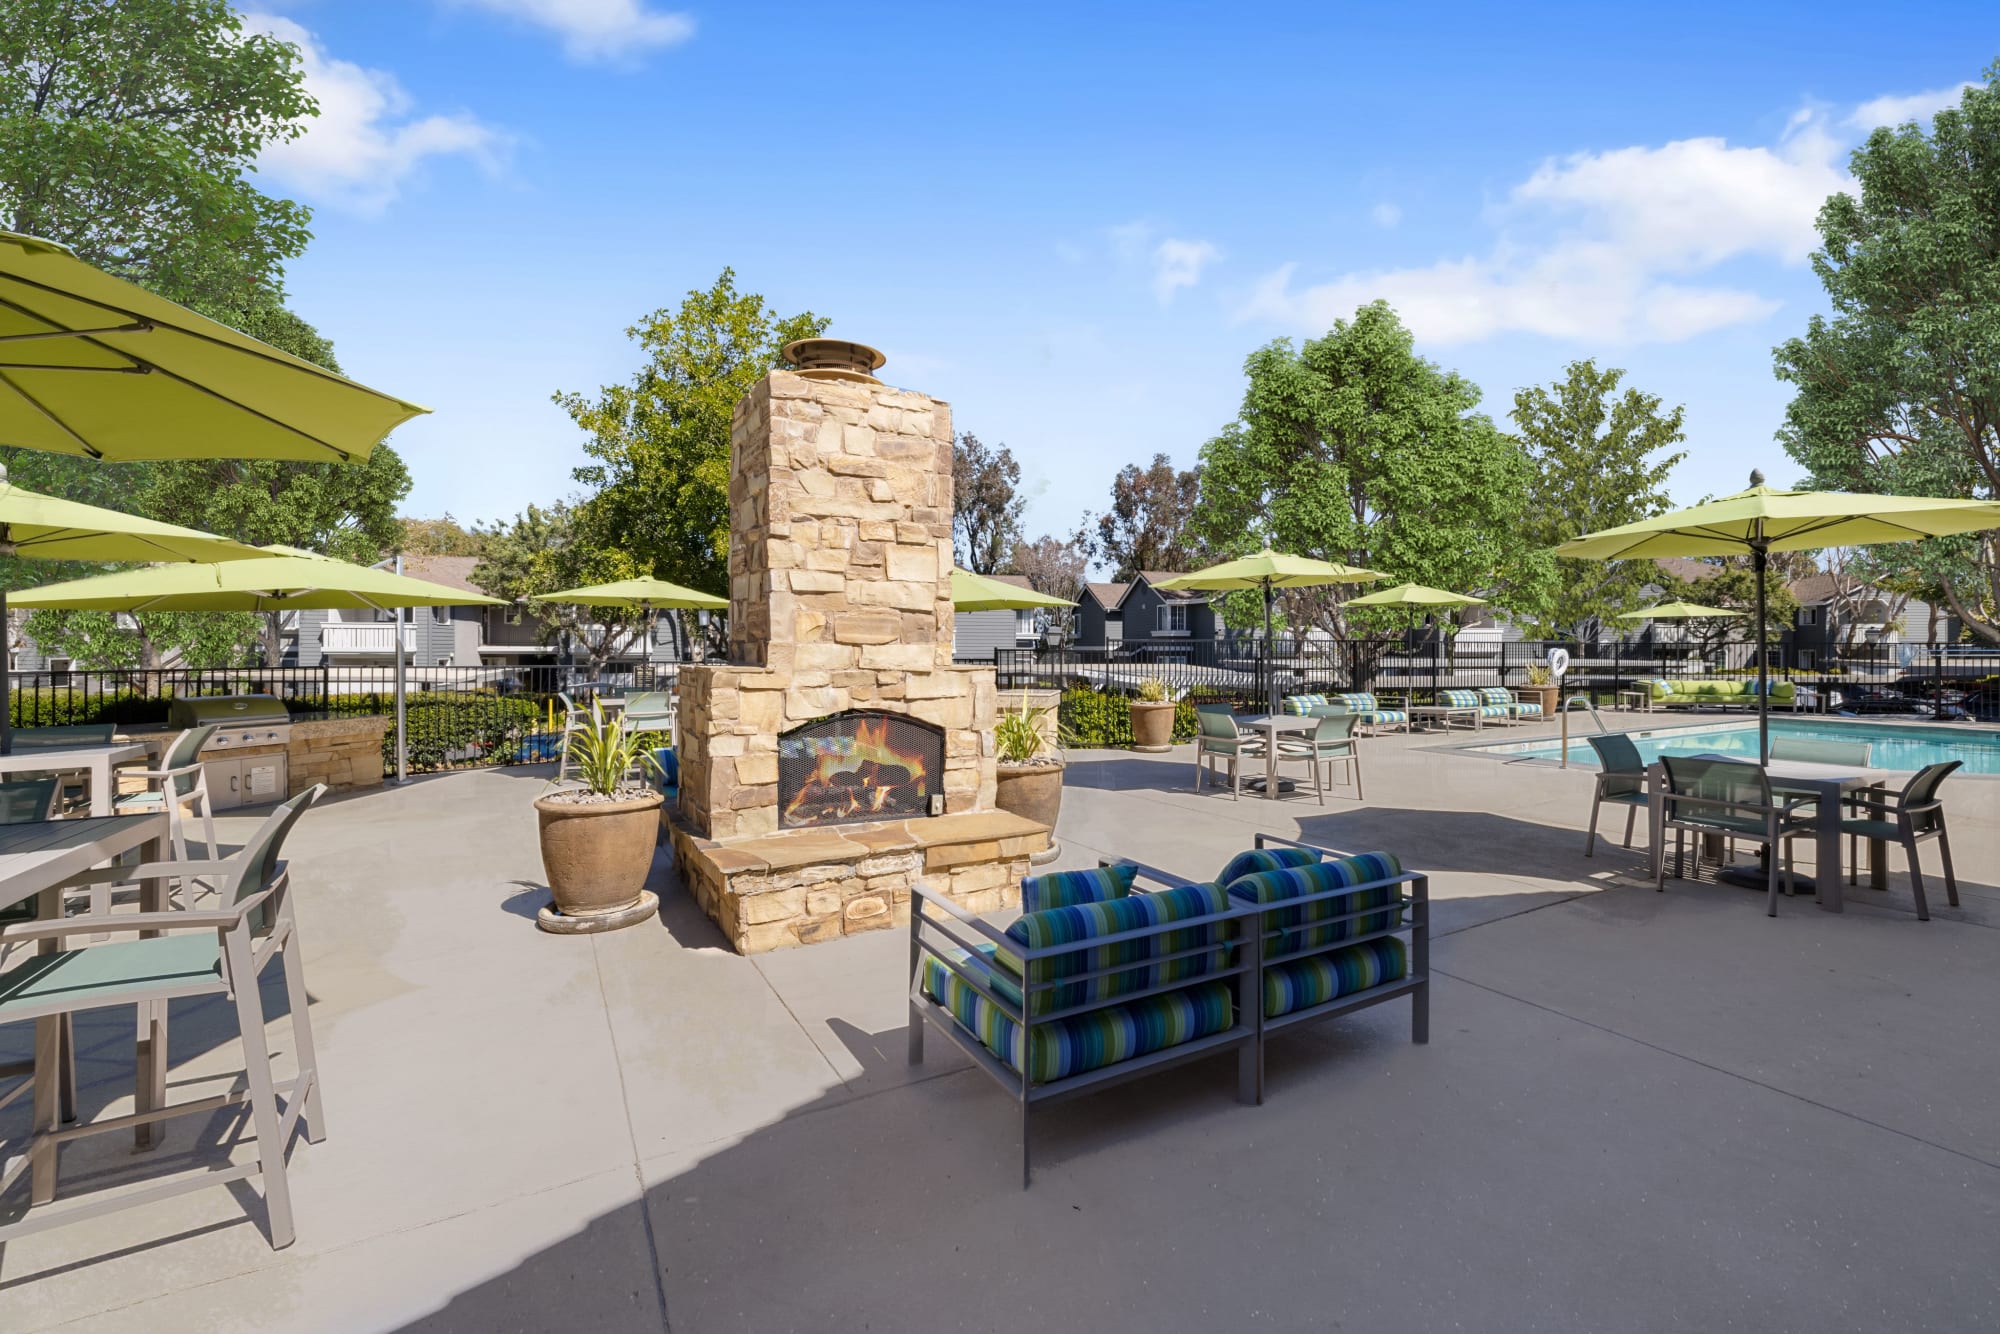 Outdoor fire pit lounge area at Village Oaks in Chino Hills, California